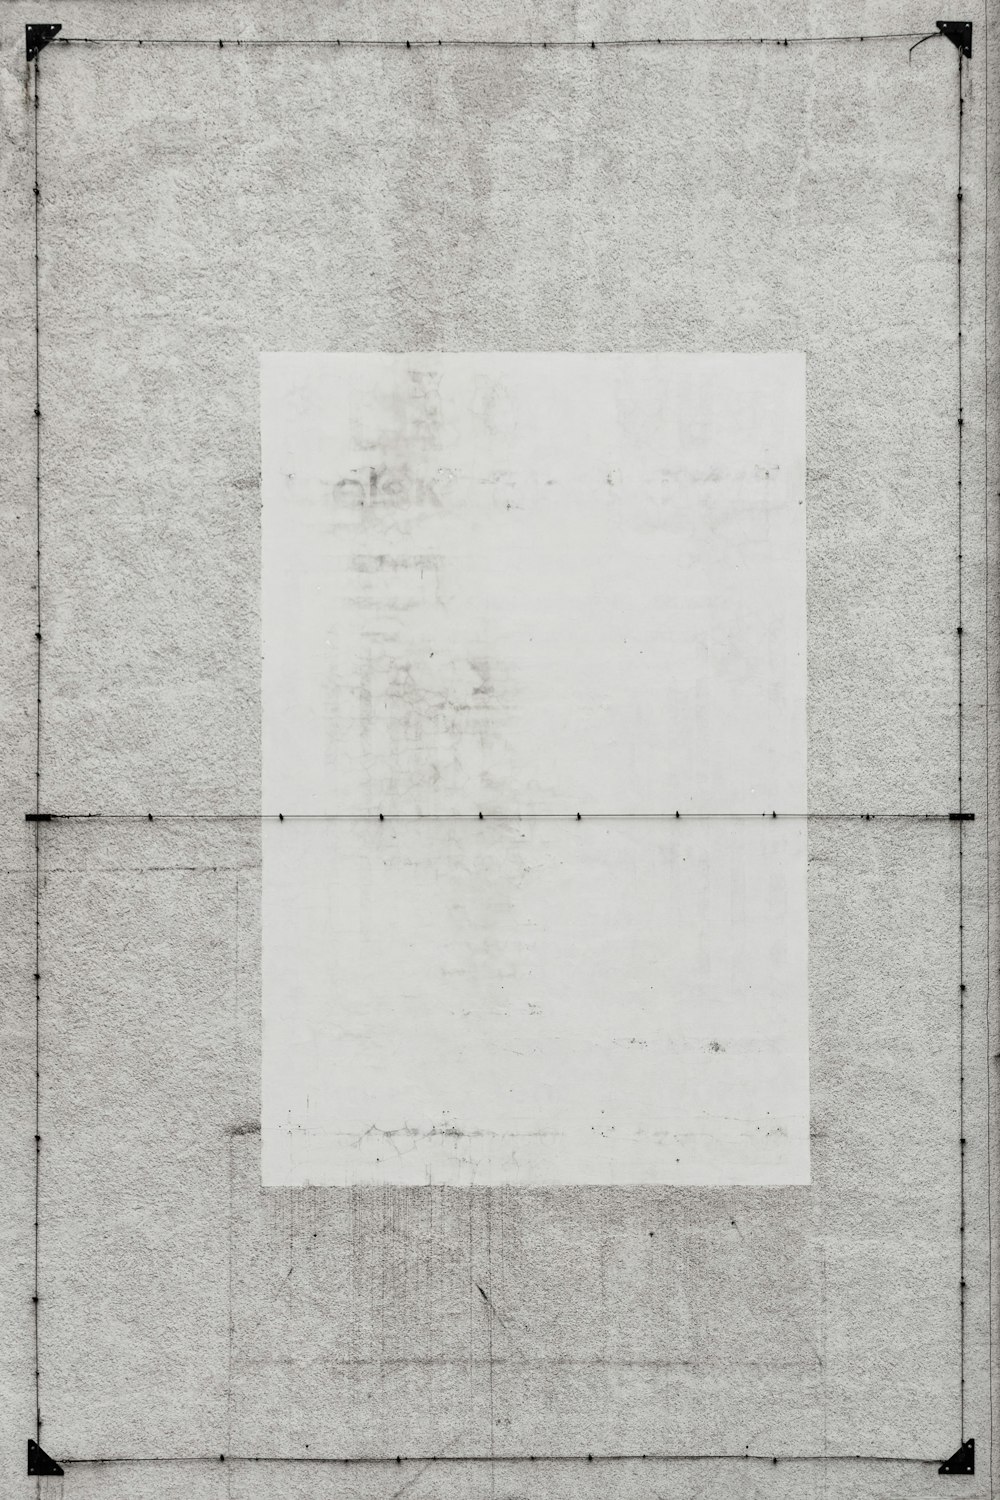 a drawing of a square on a sheet of paper